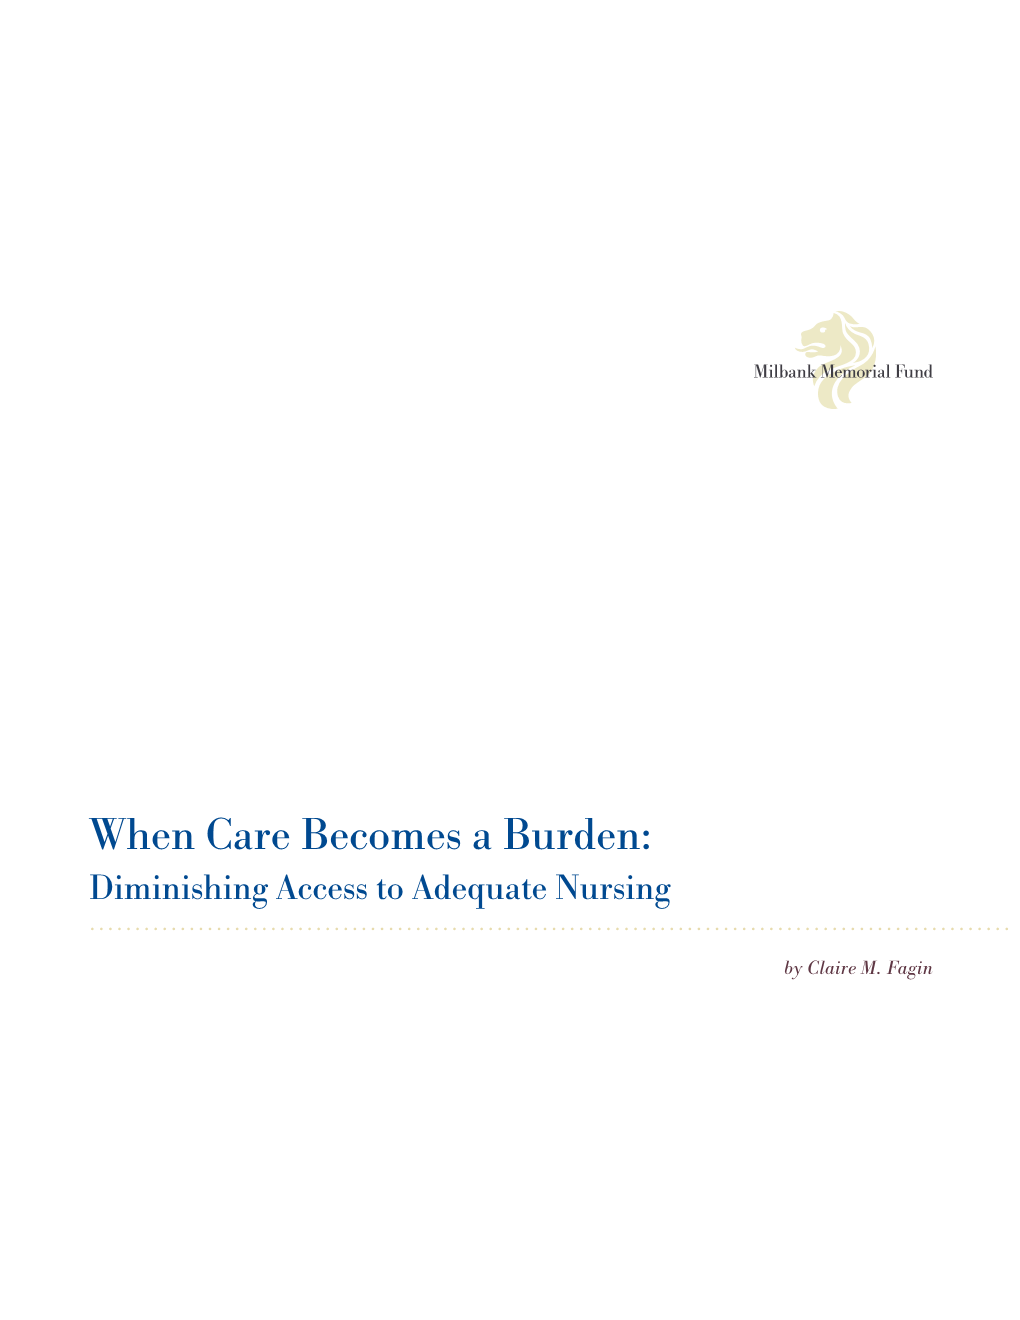 When Care Becomes a Burden: Diminishing Access to Adequate Nursing